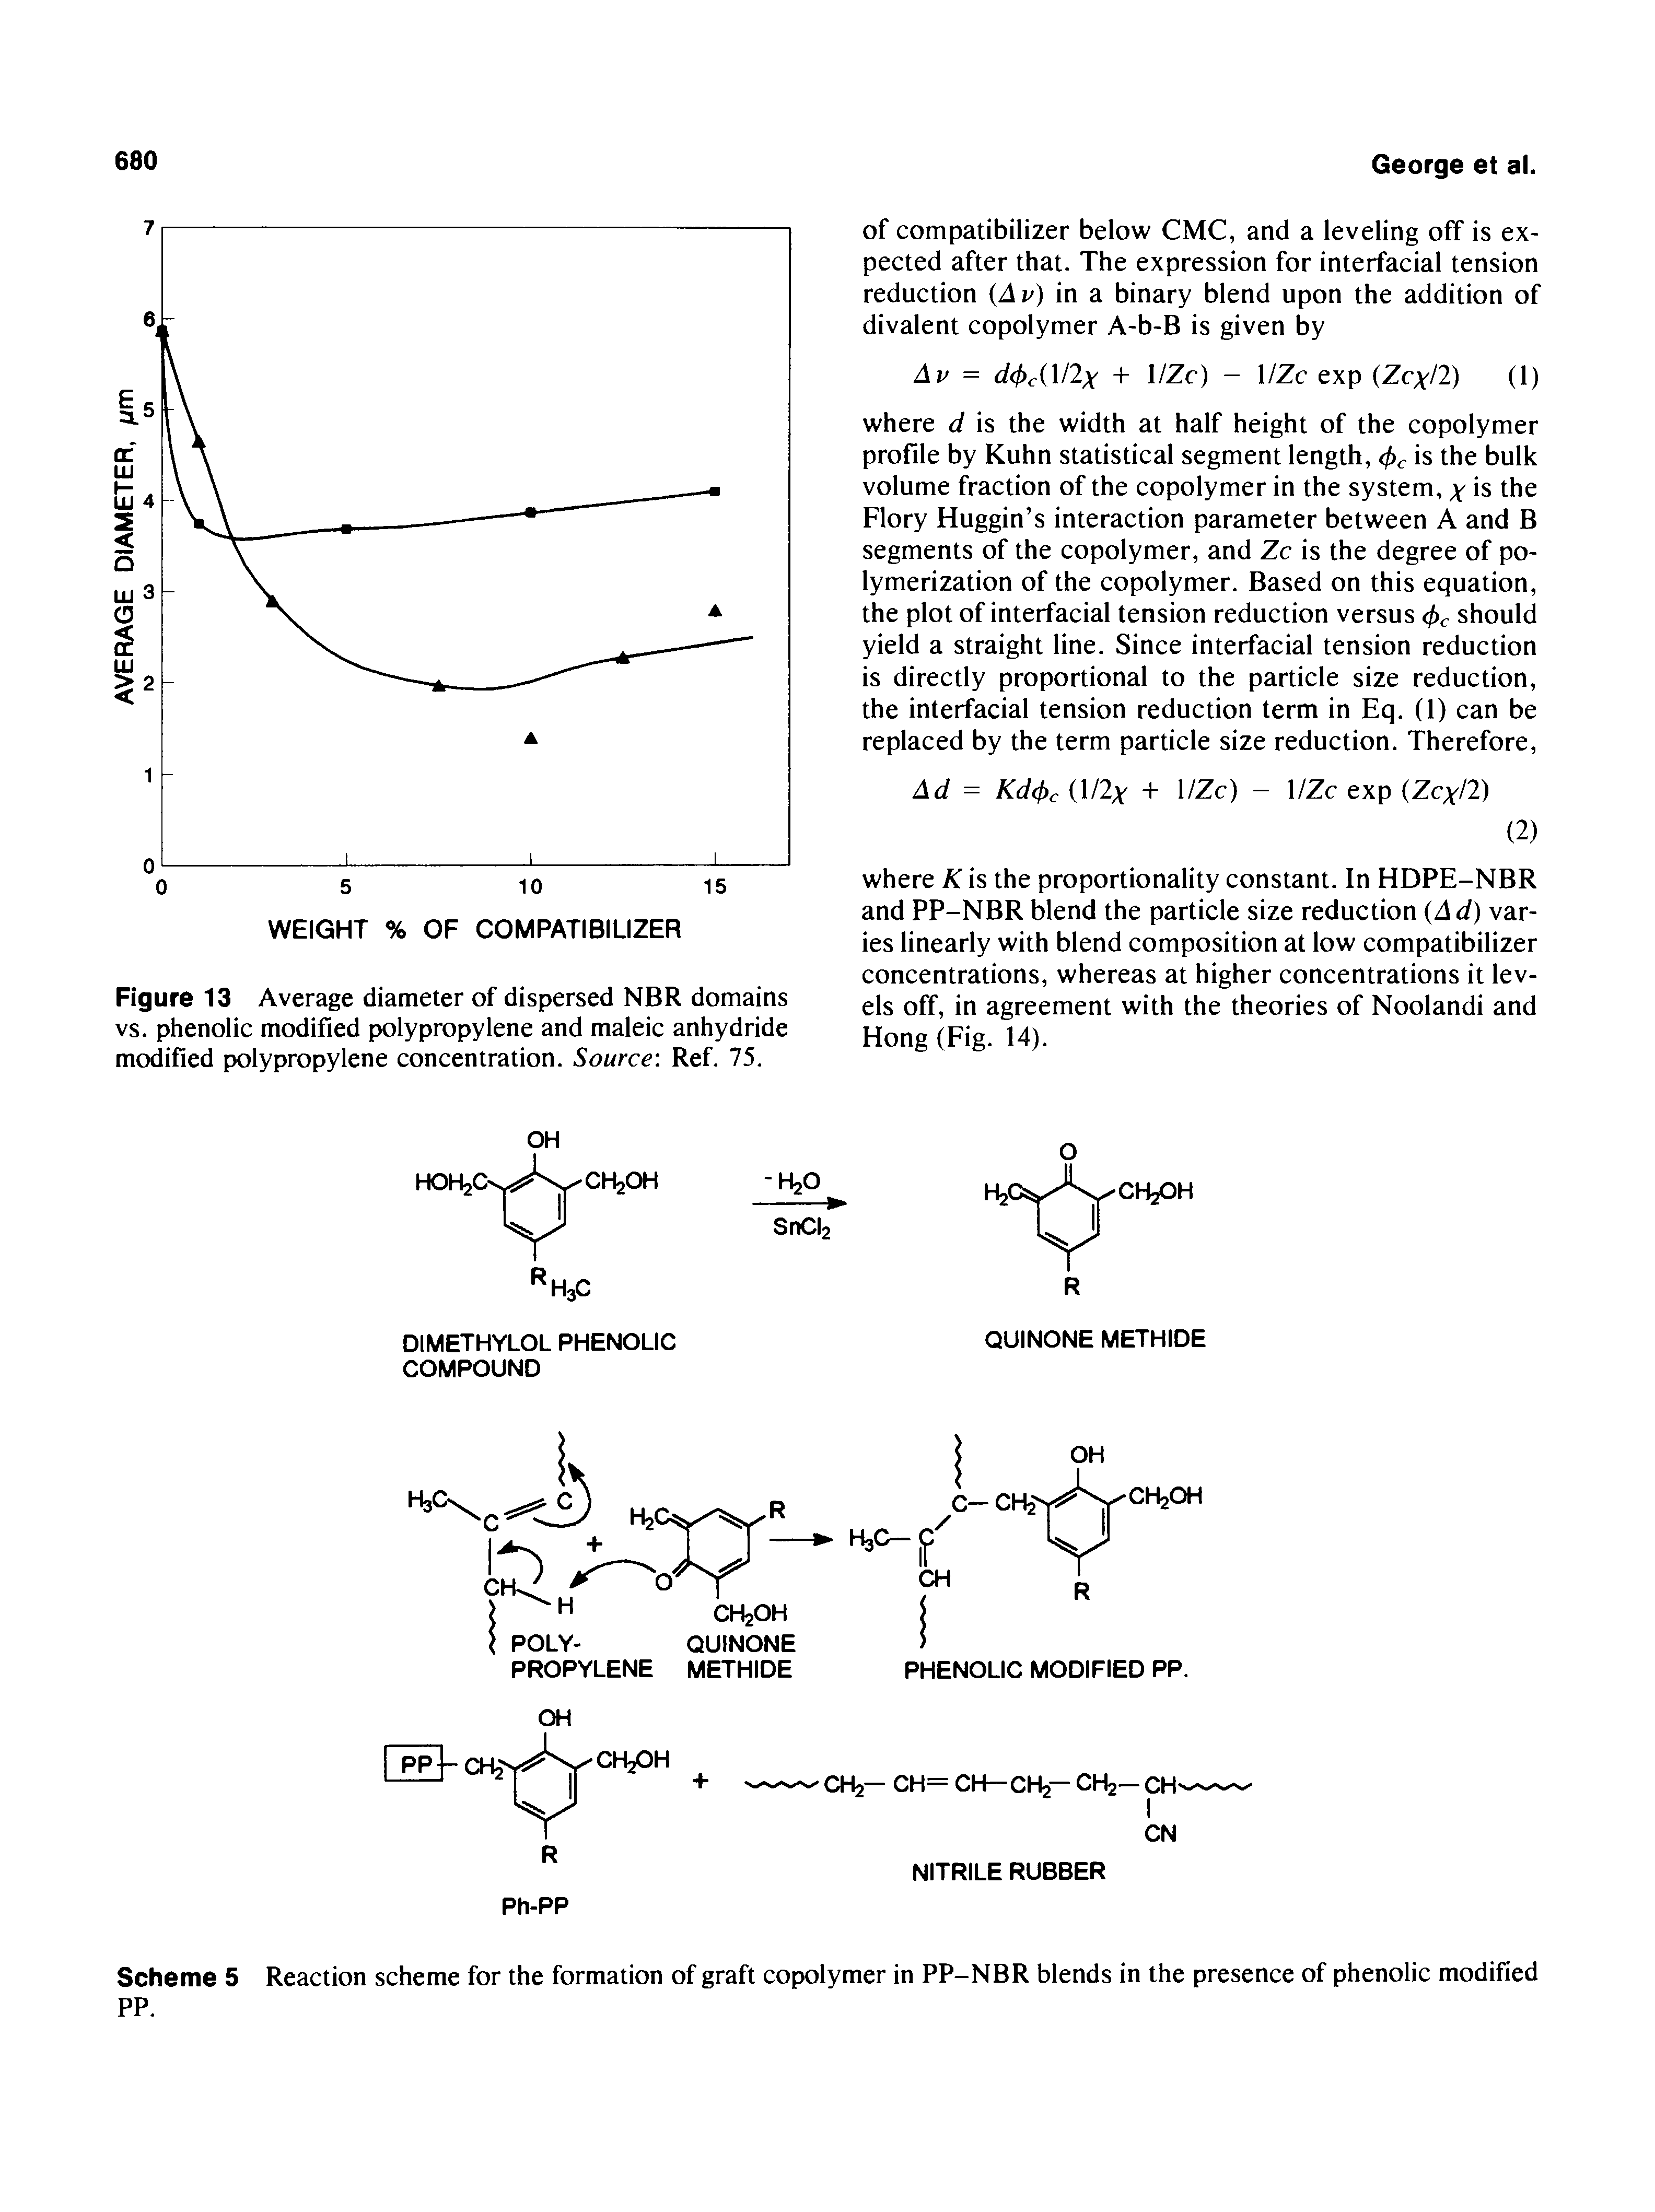 Scheme 5 Reaction scheme for the formation of graft copolymer in PP-NBR blends in the presence of phenolic modified PP.